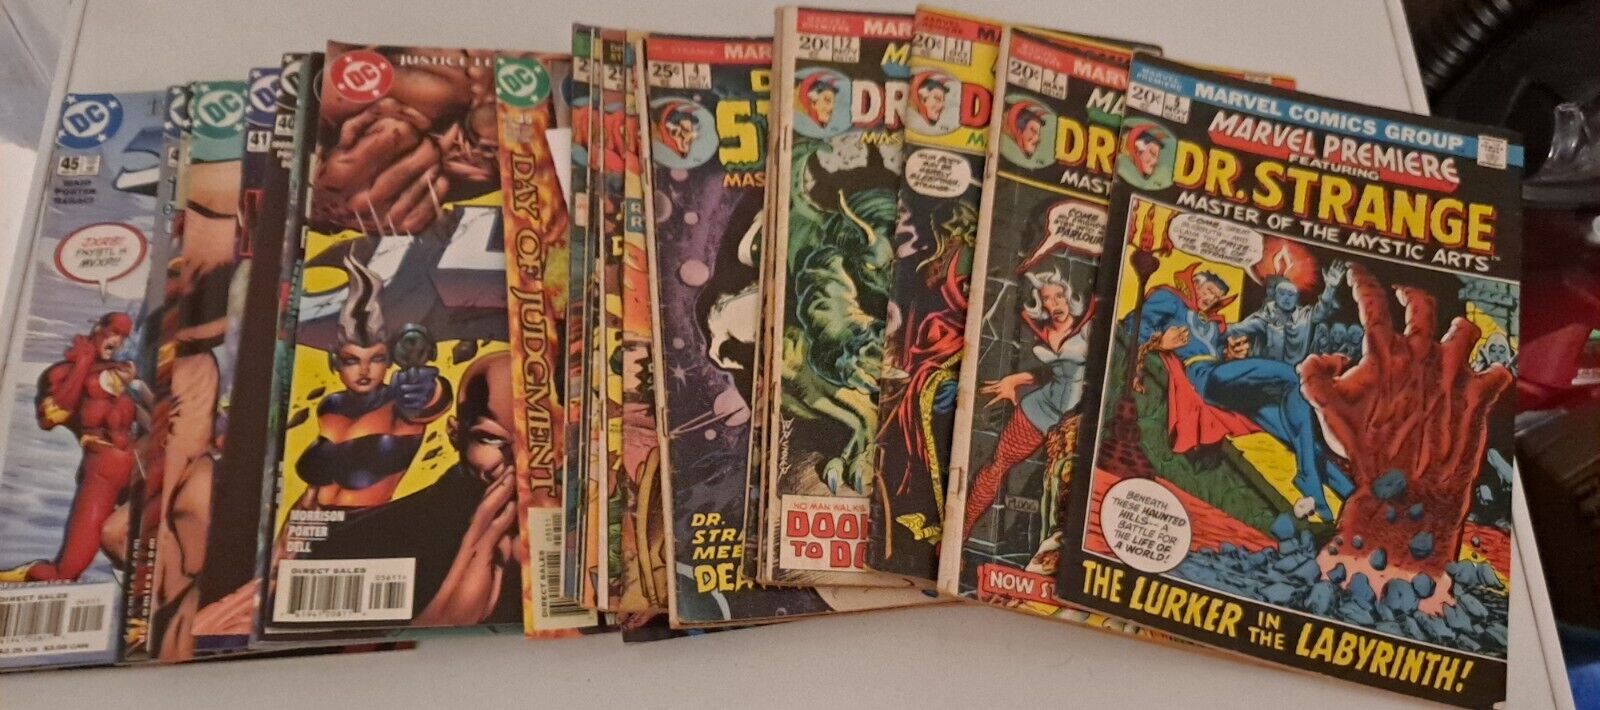 MARVEL PREMIERE FEATURING DR STRANGE. PRICED TO SELL